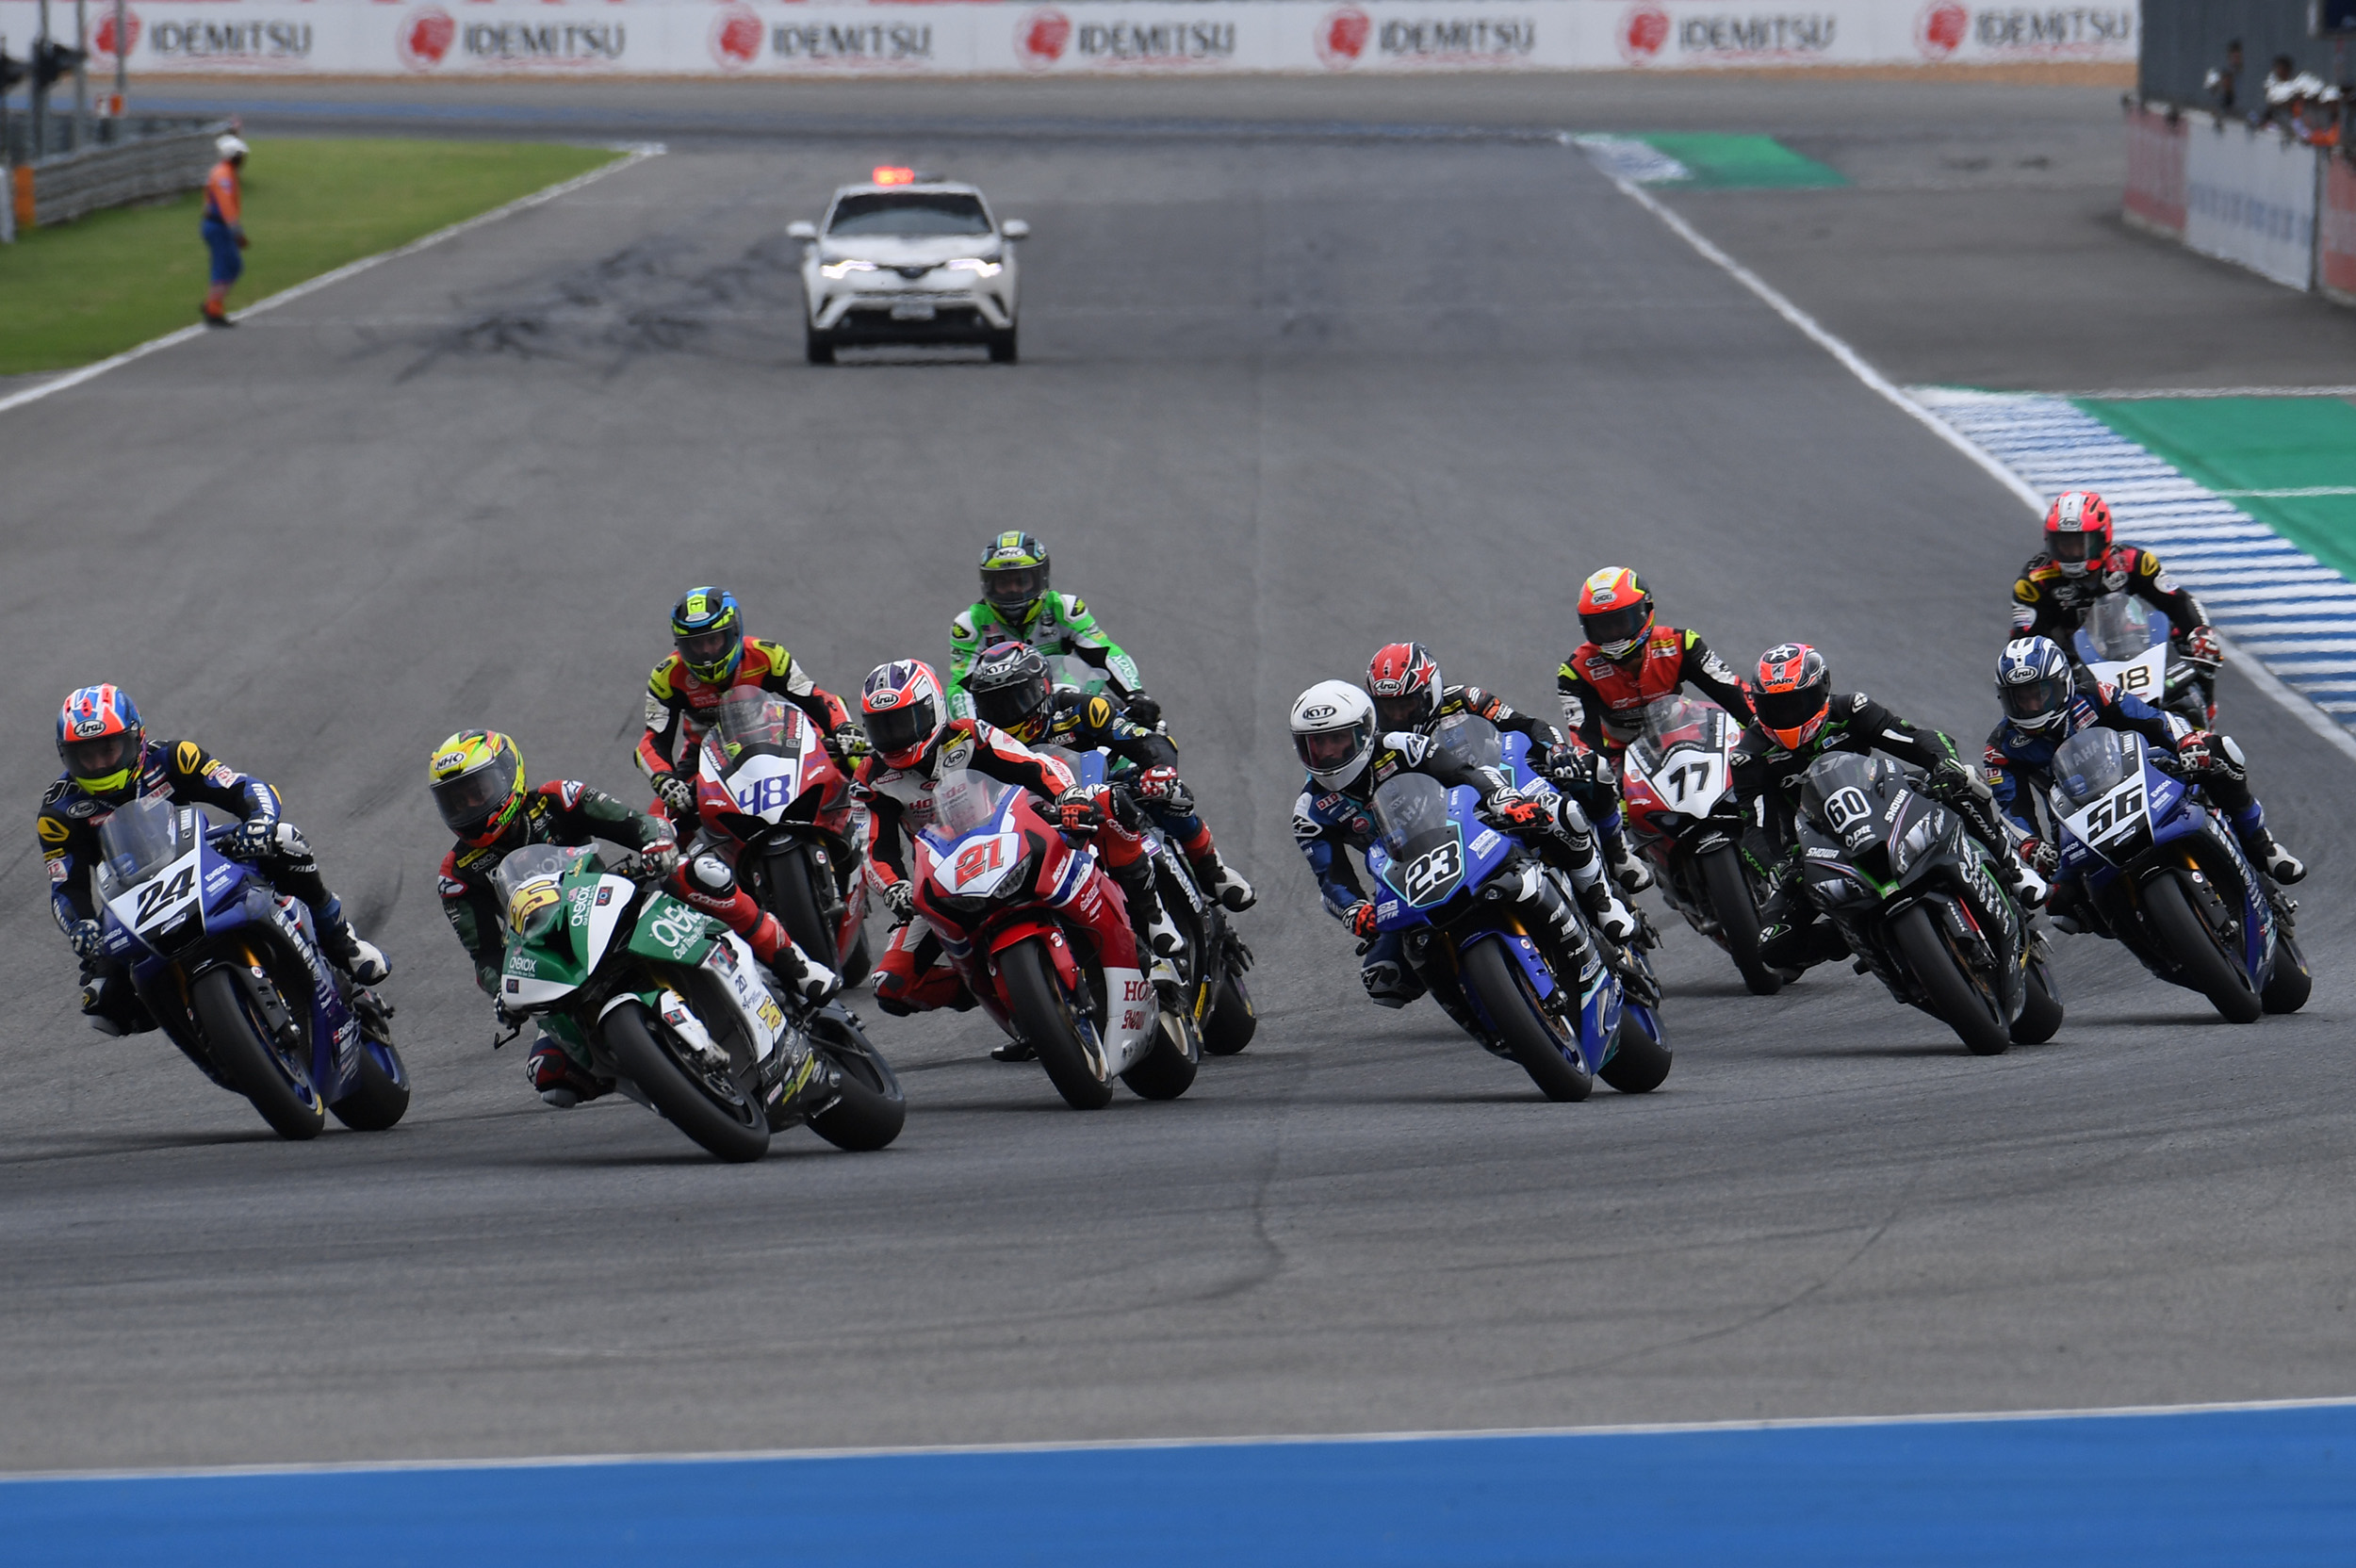 ASB1000 TOP RIDERS TO FEATURE IN 2019 SUZUKA 8 HOURS